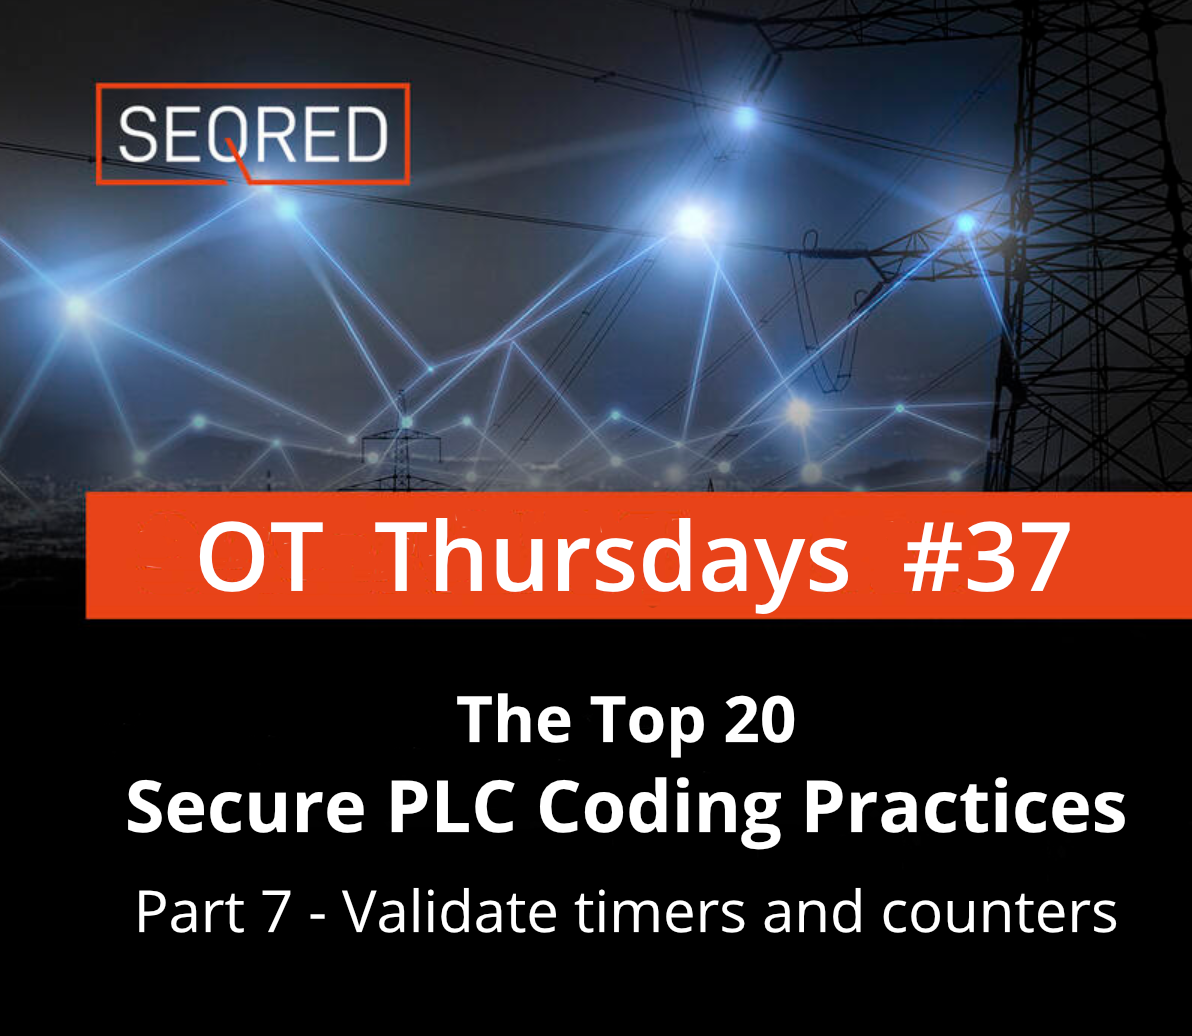 The Top 20 Secure PLC Coding Practices. Part 7 - Validate timers and counters